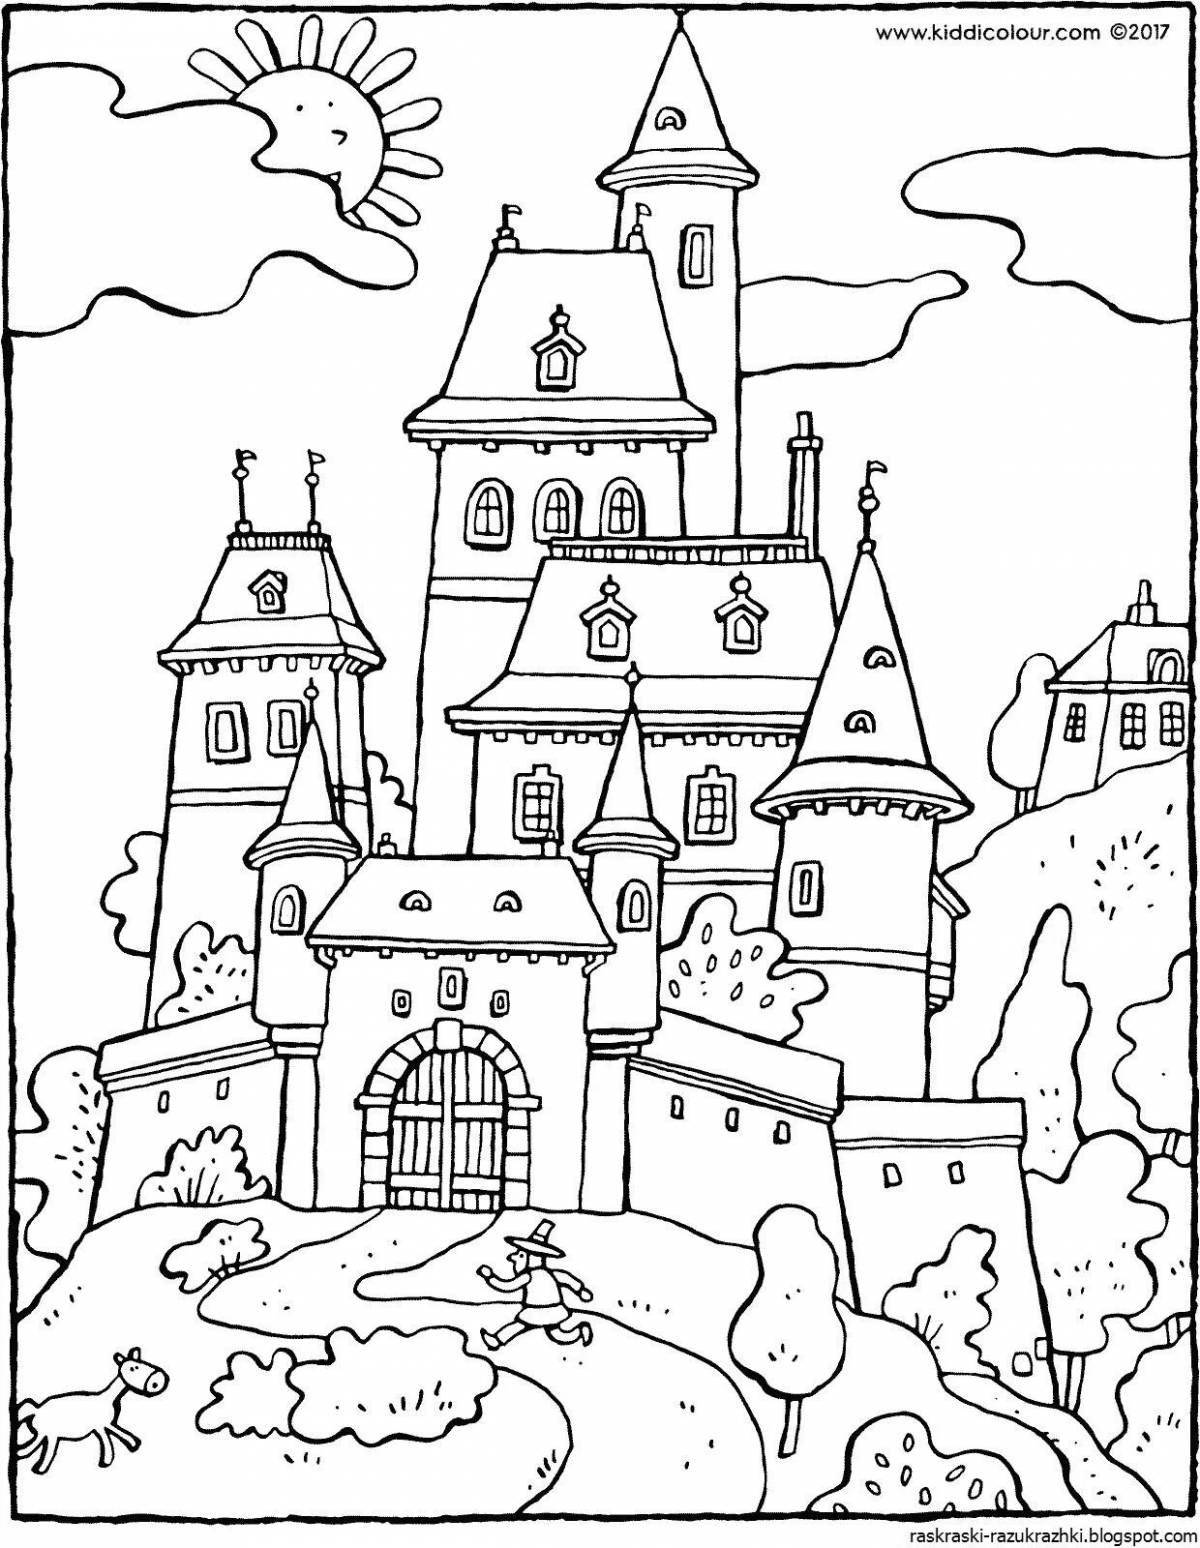 Funny kingdom coloring book for kids